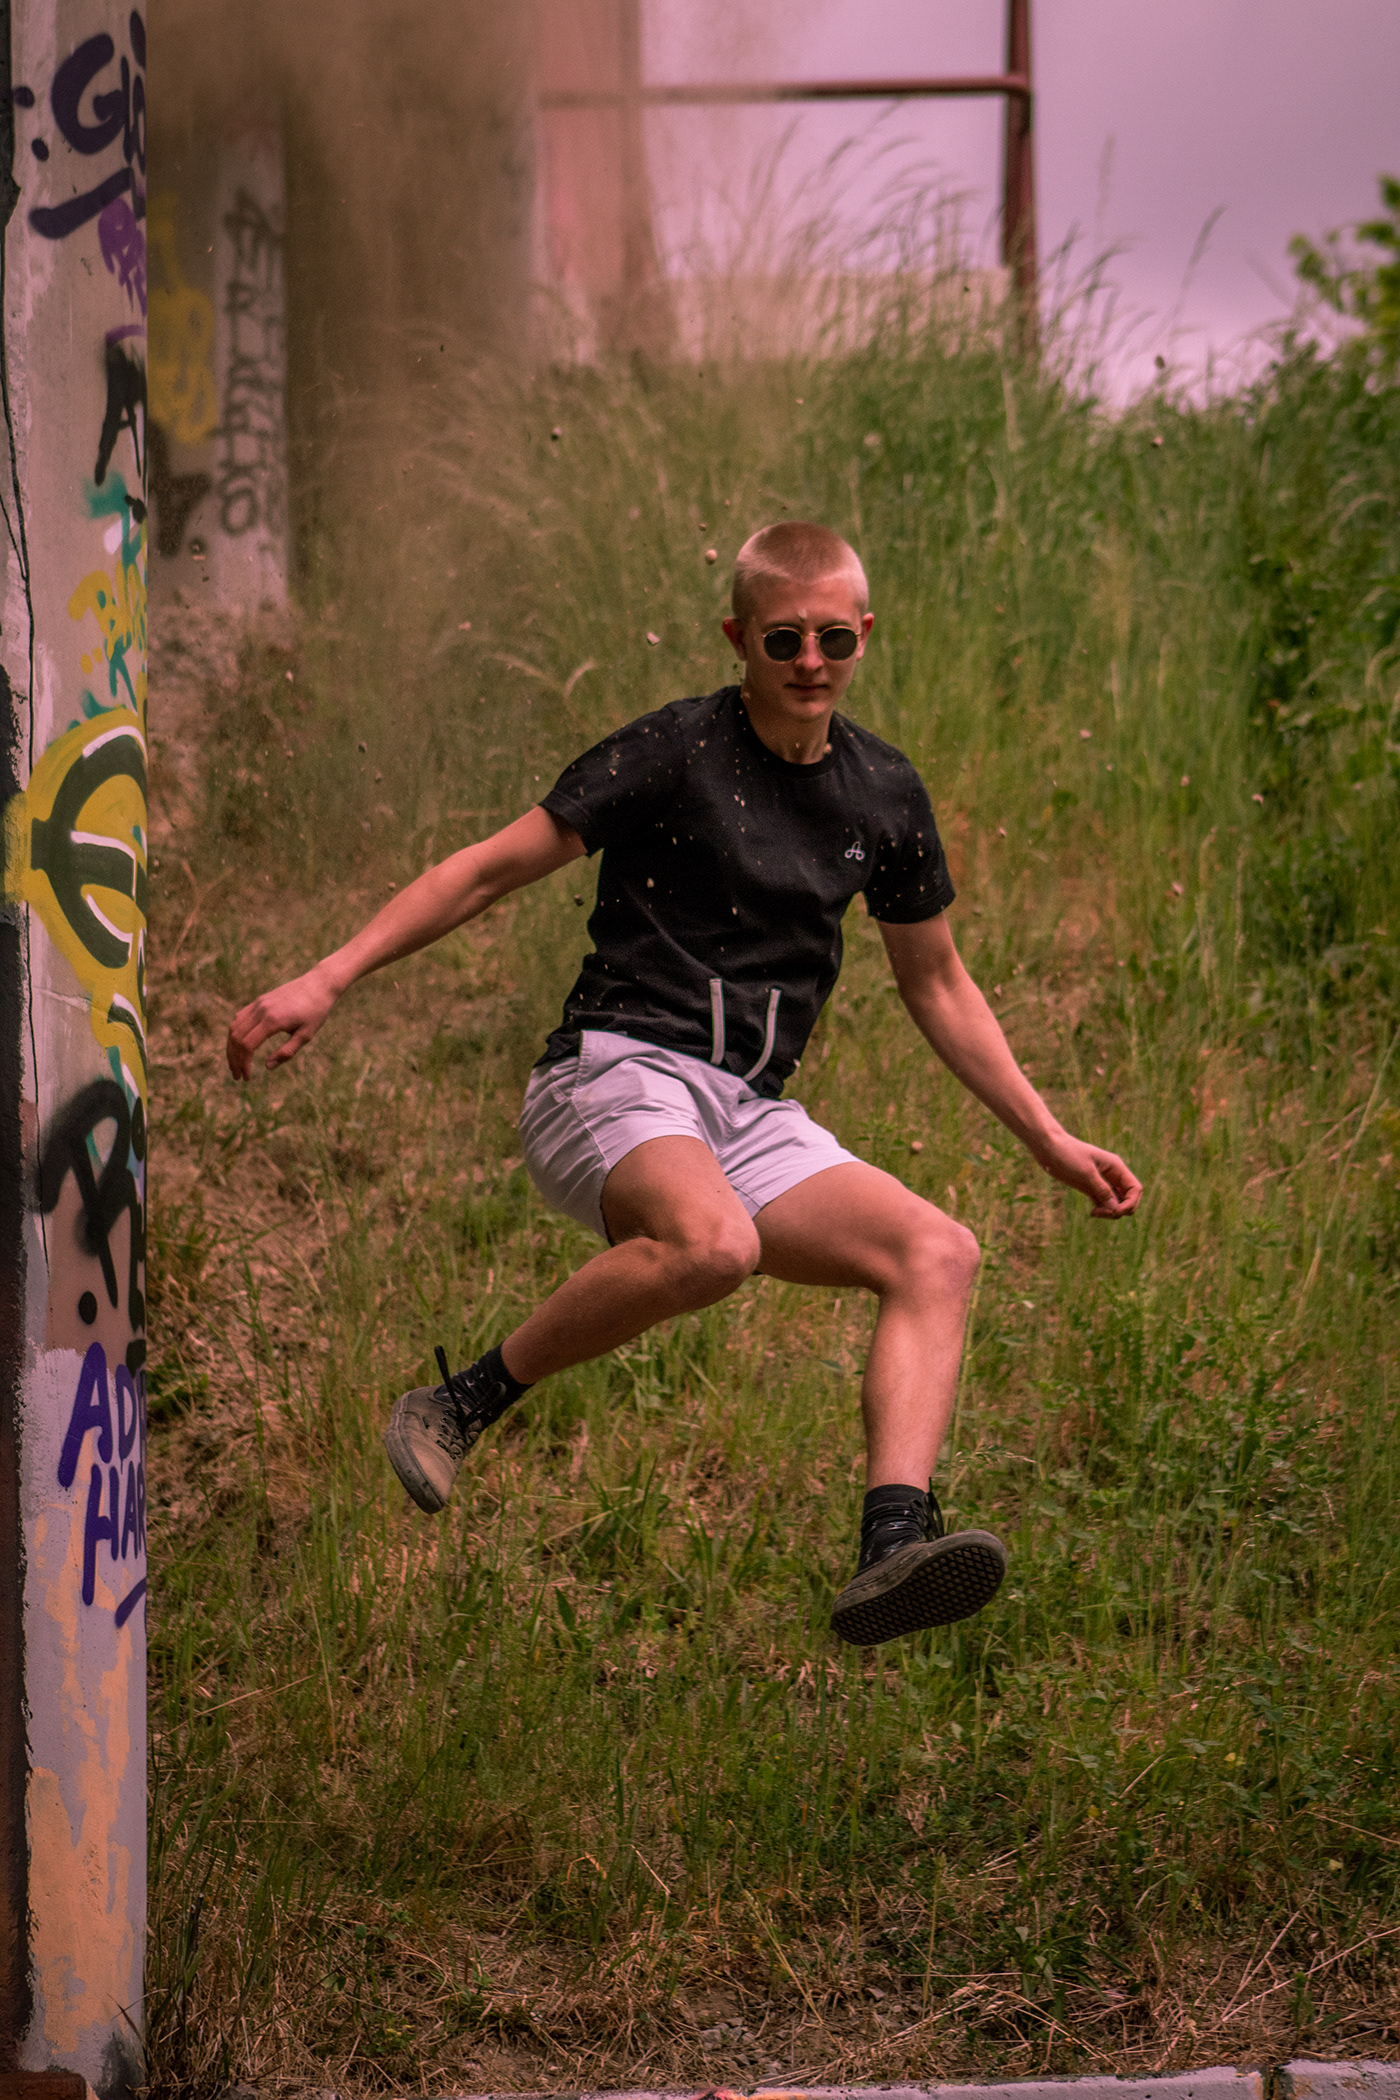 A action shot of a model jumping in the air with dust behind featuring The Uprising tshirt.